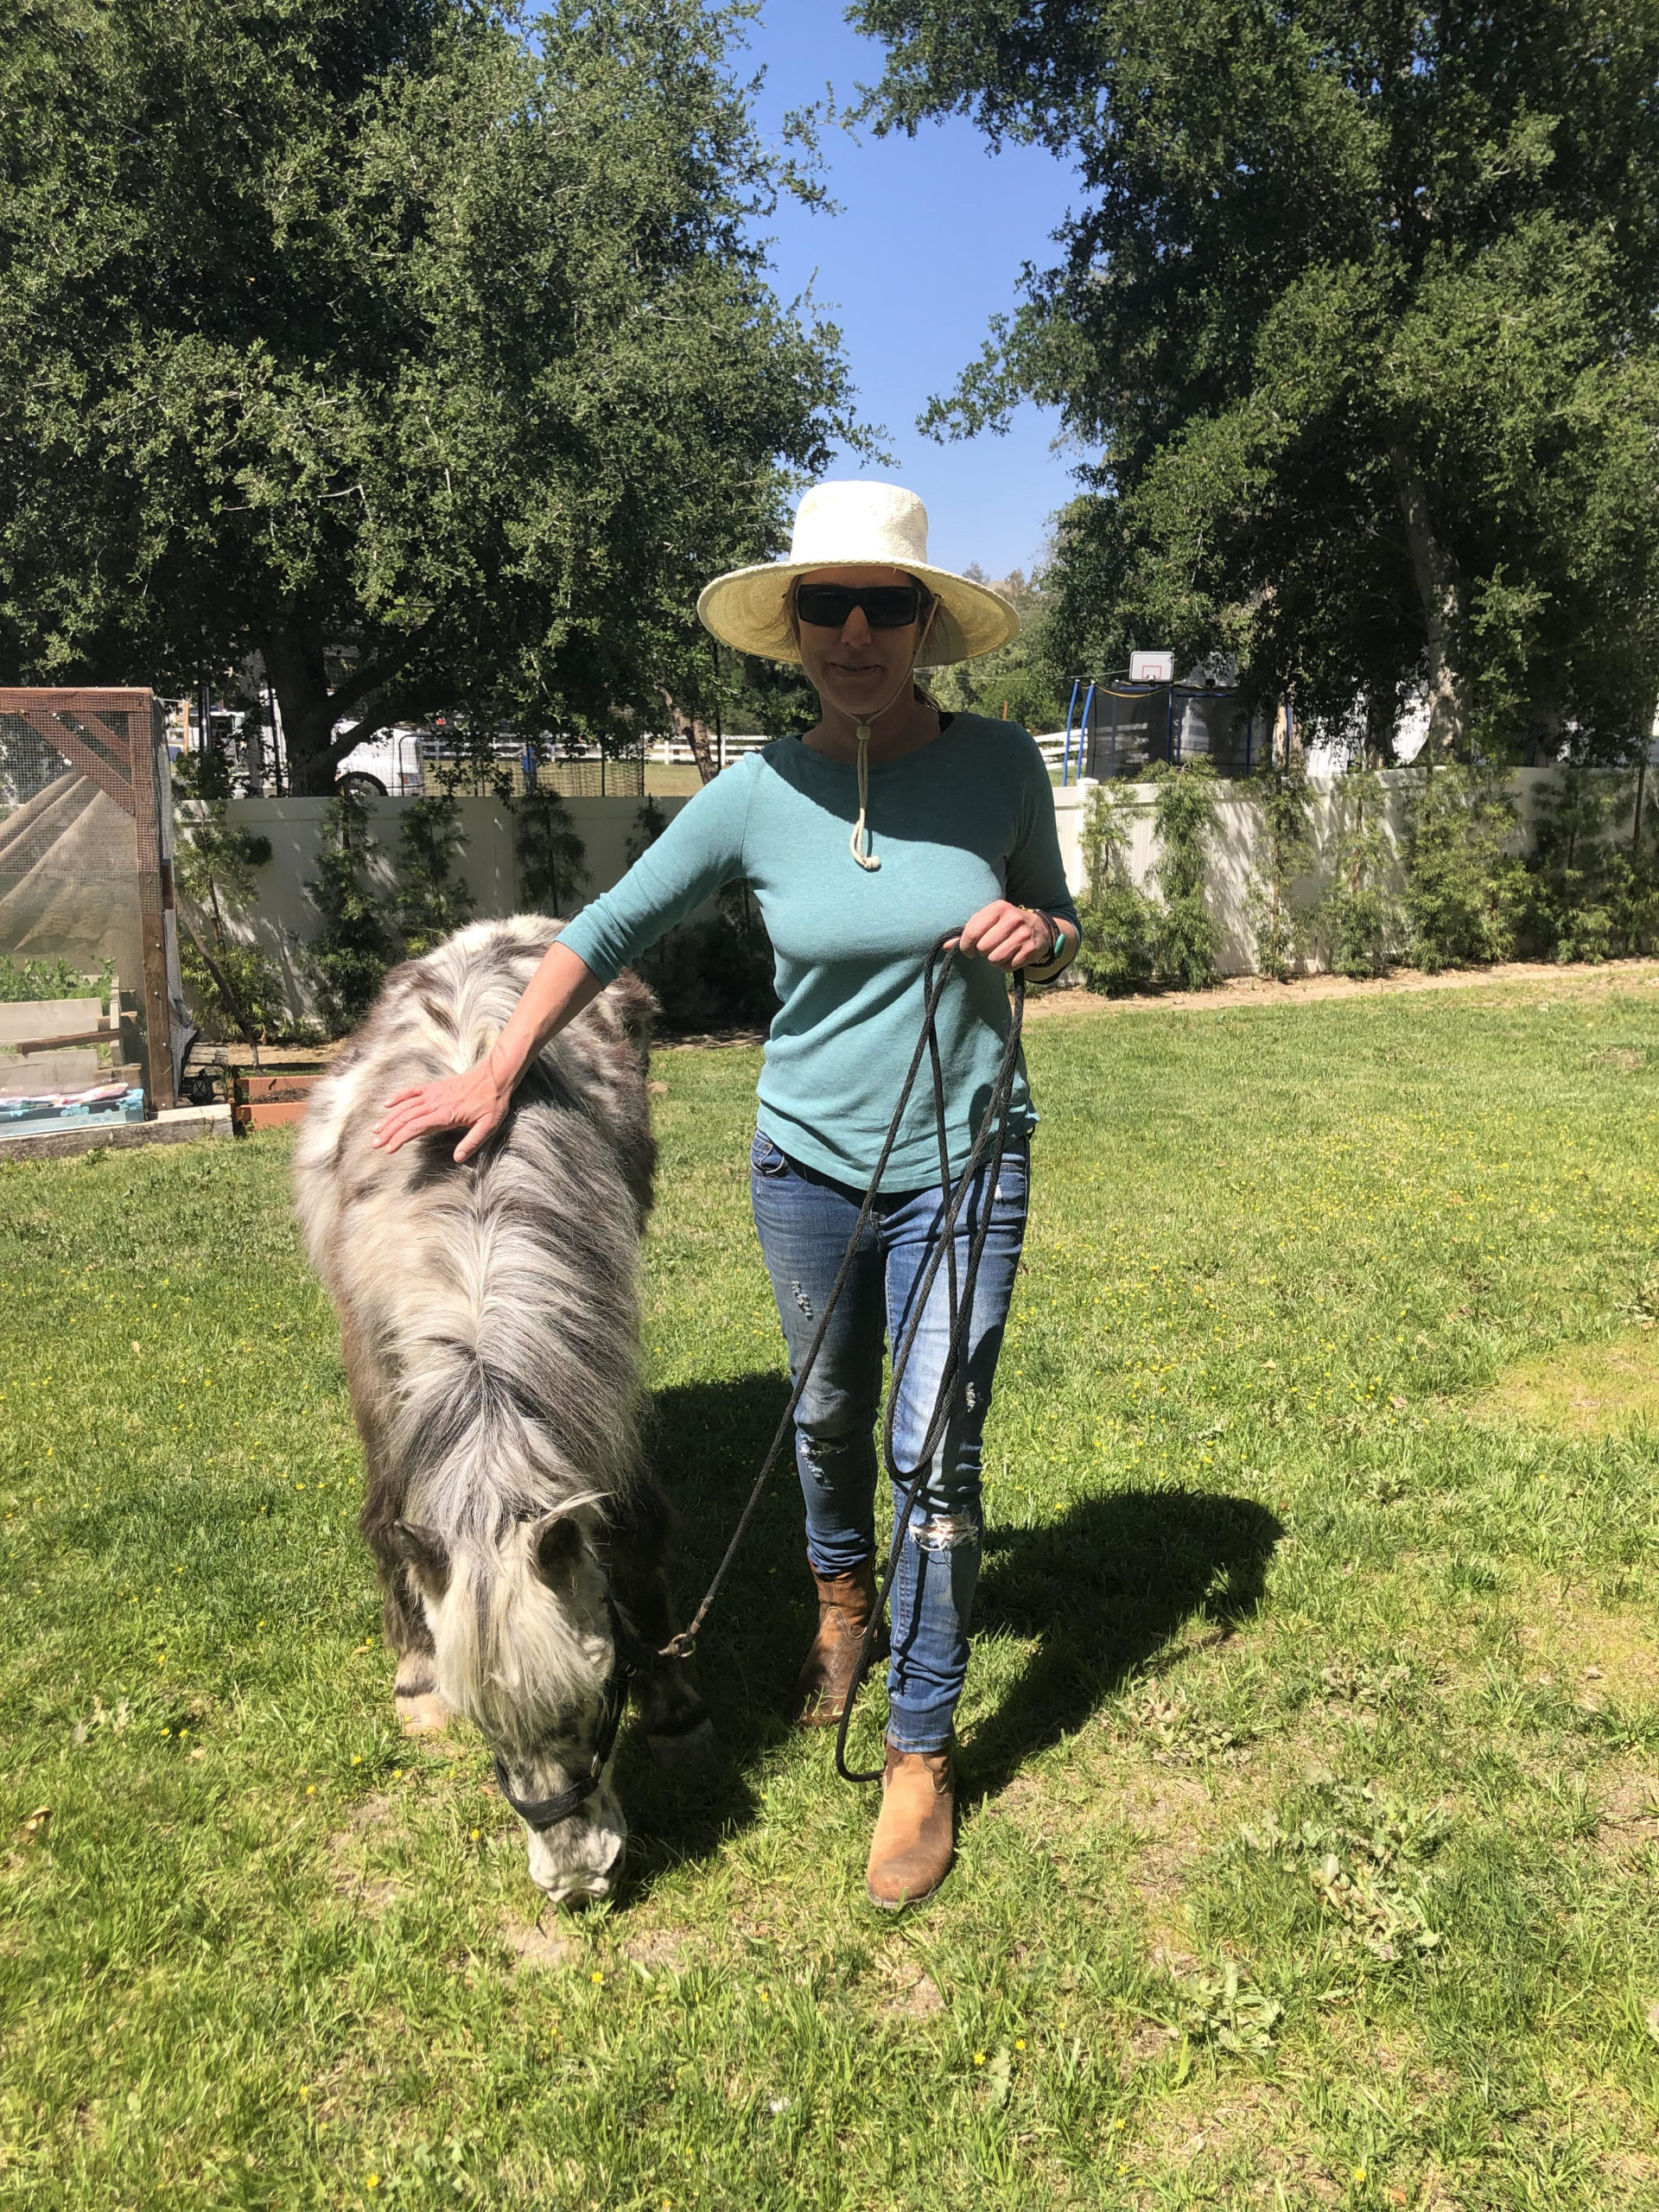 Nicole and pony walk us through a day in the life of an ecopsychologist